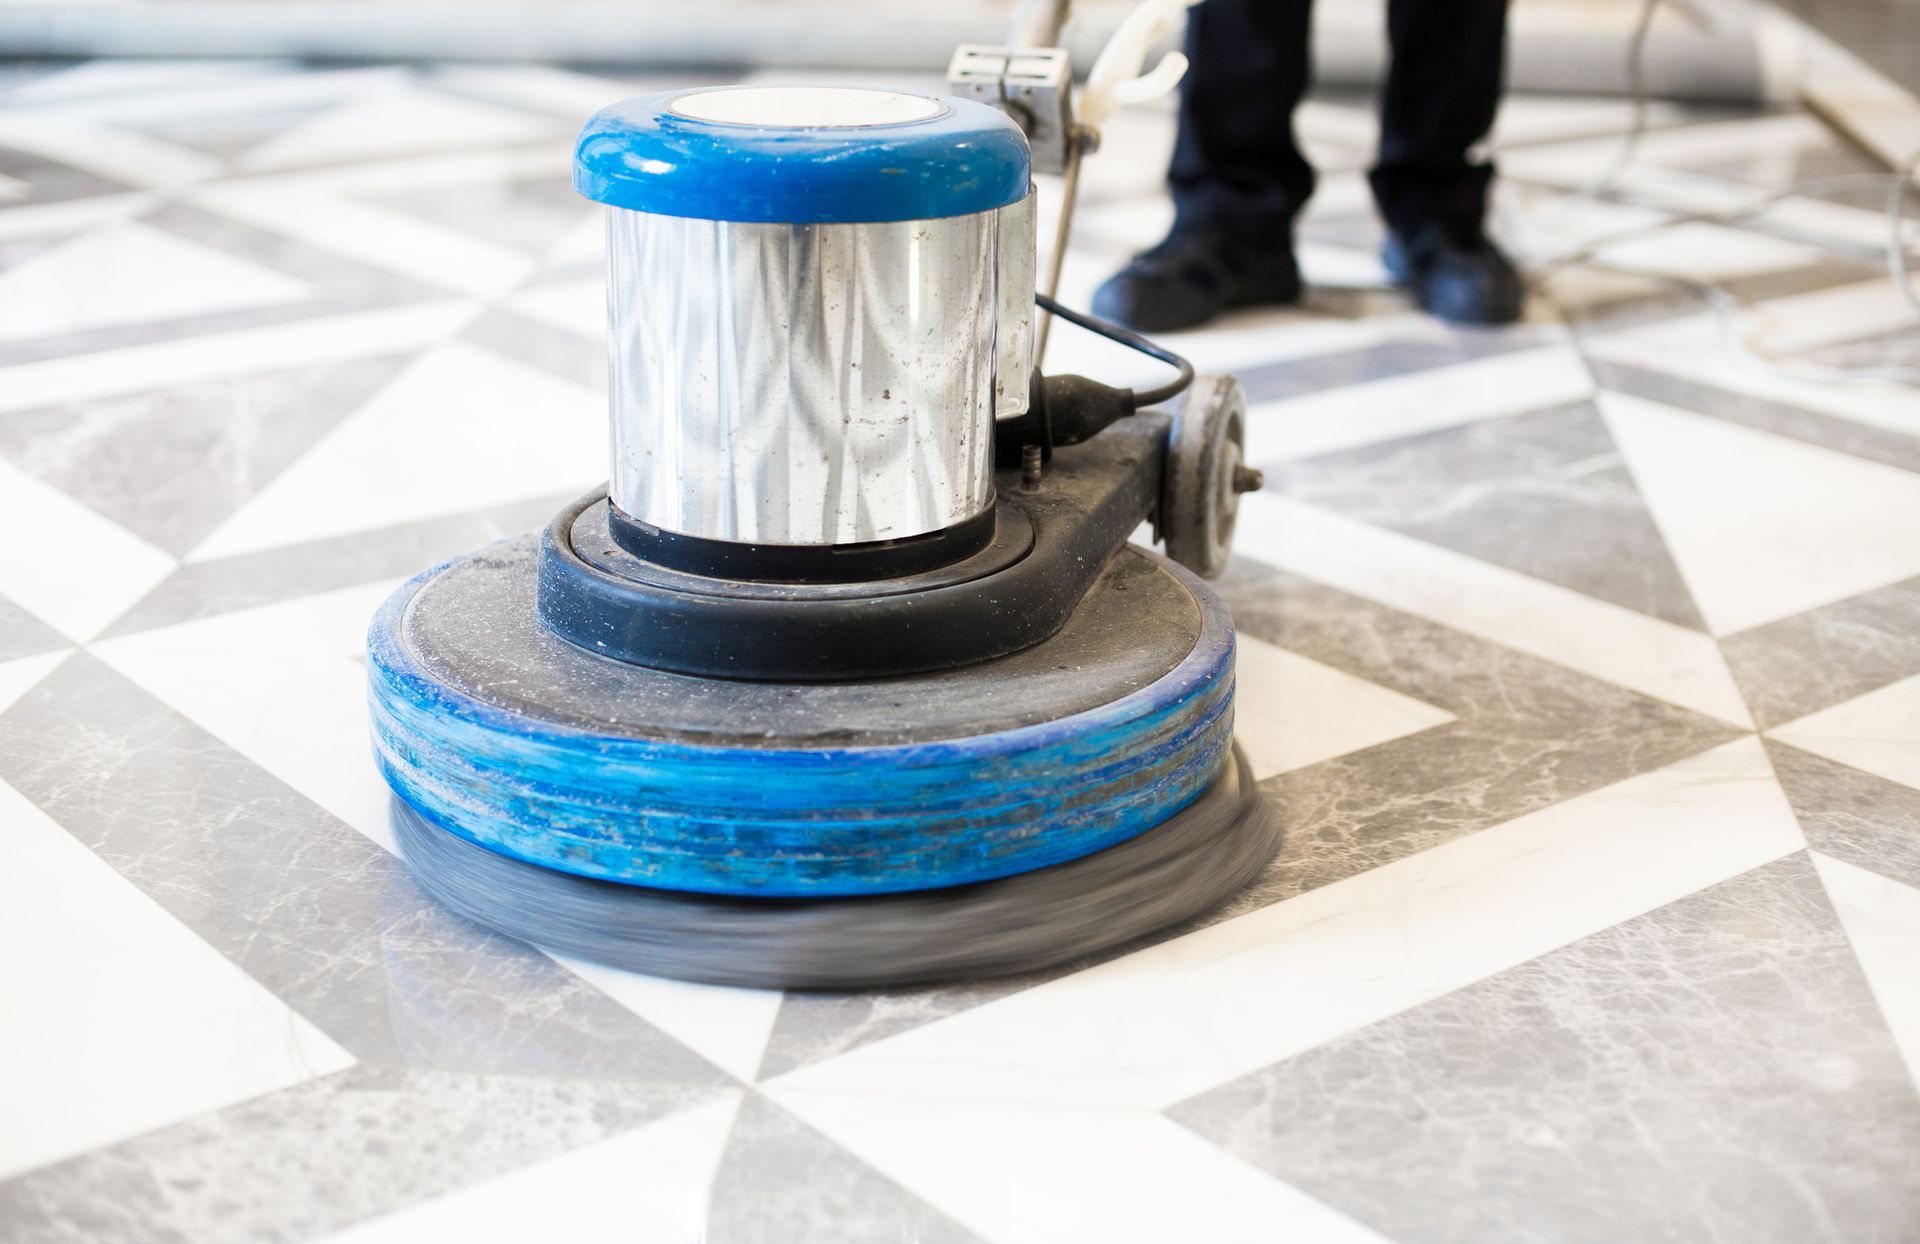 A person is using a machine to polish a tiled floor.